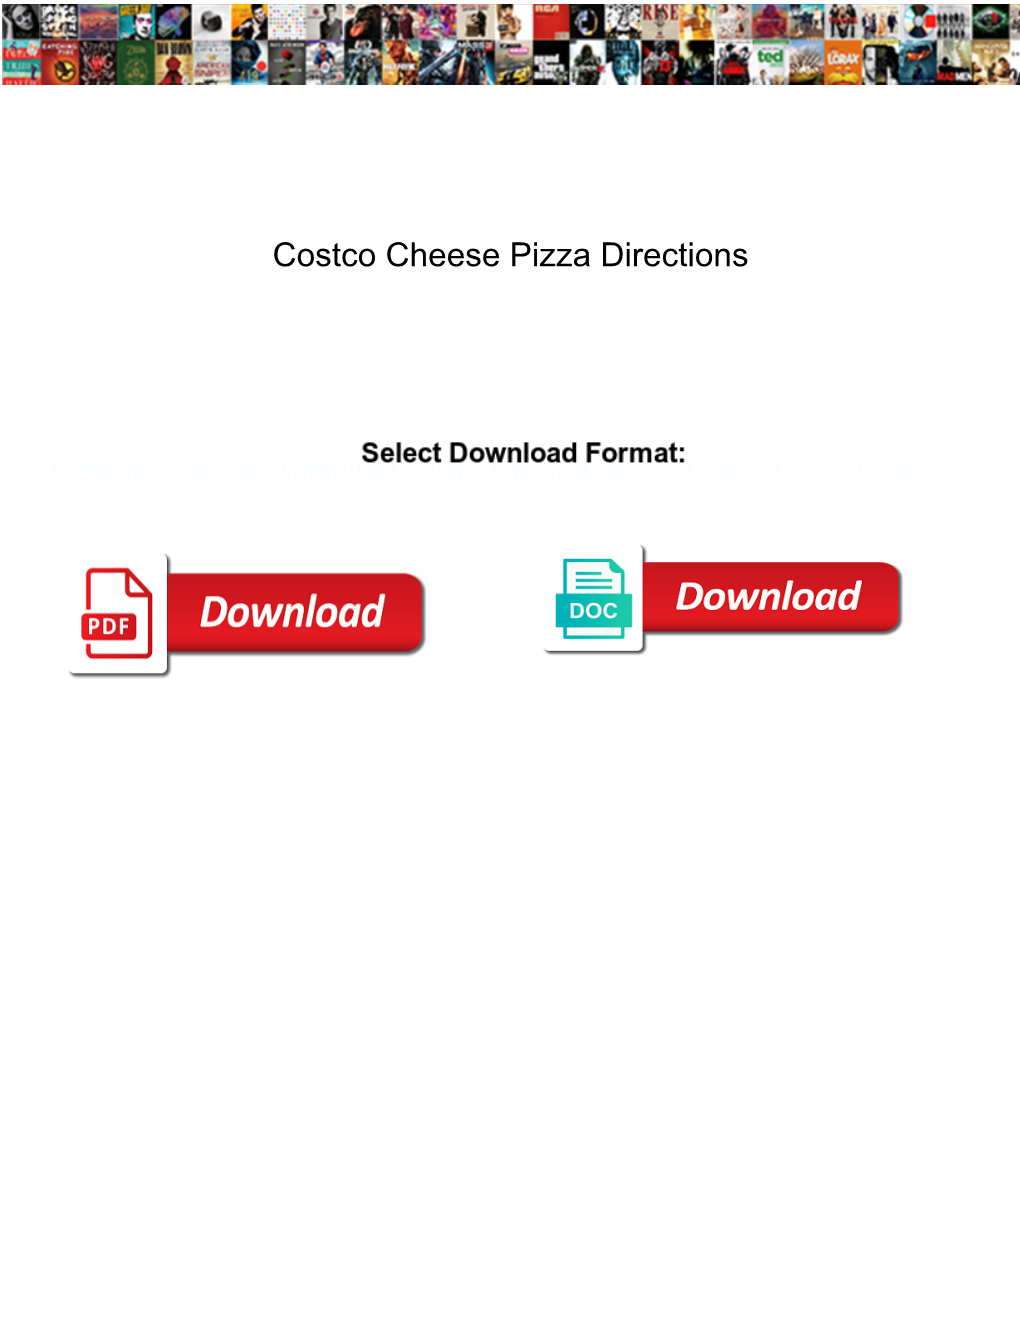 Costco Cheese Pizza Directions